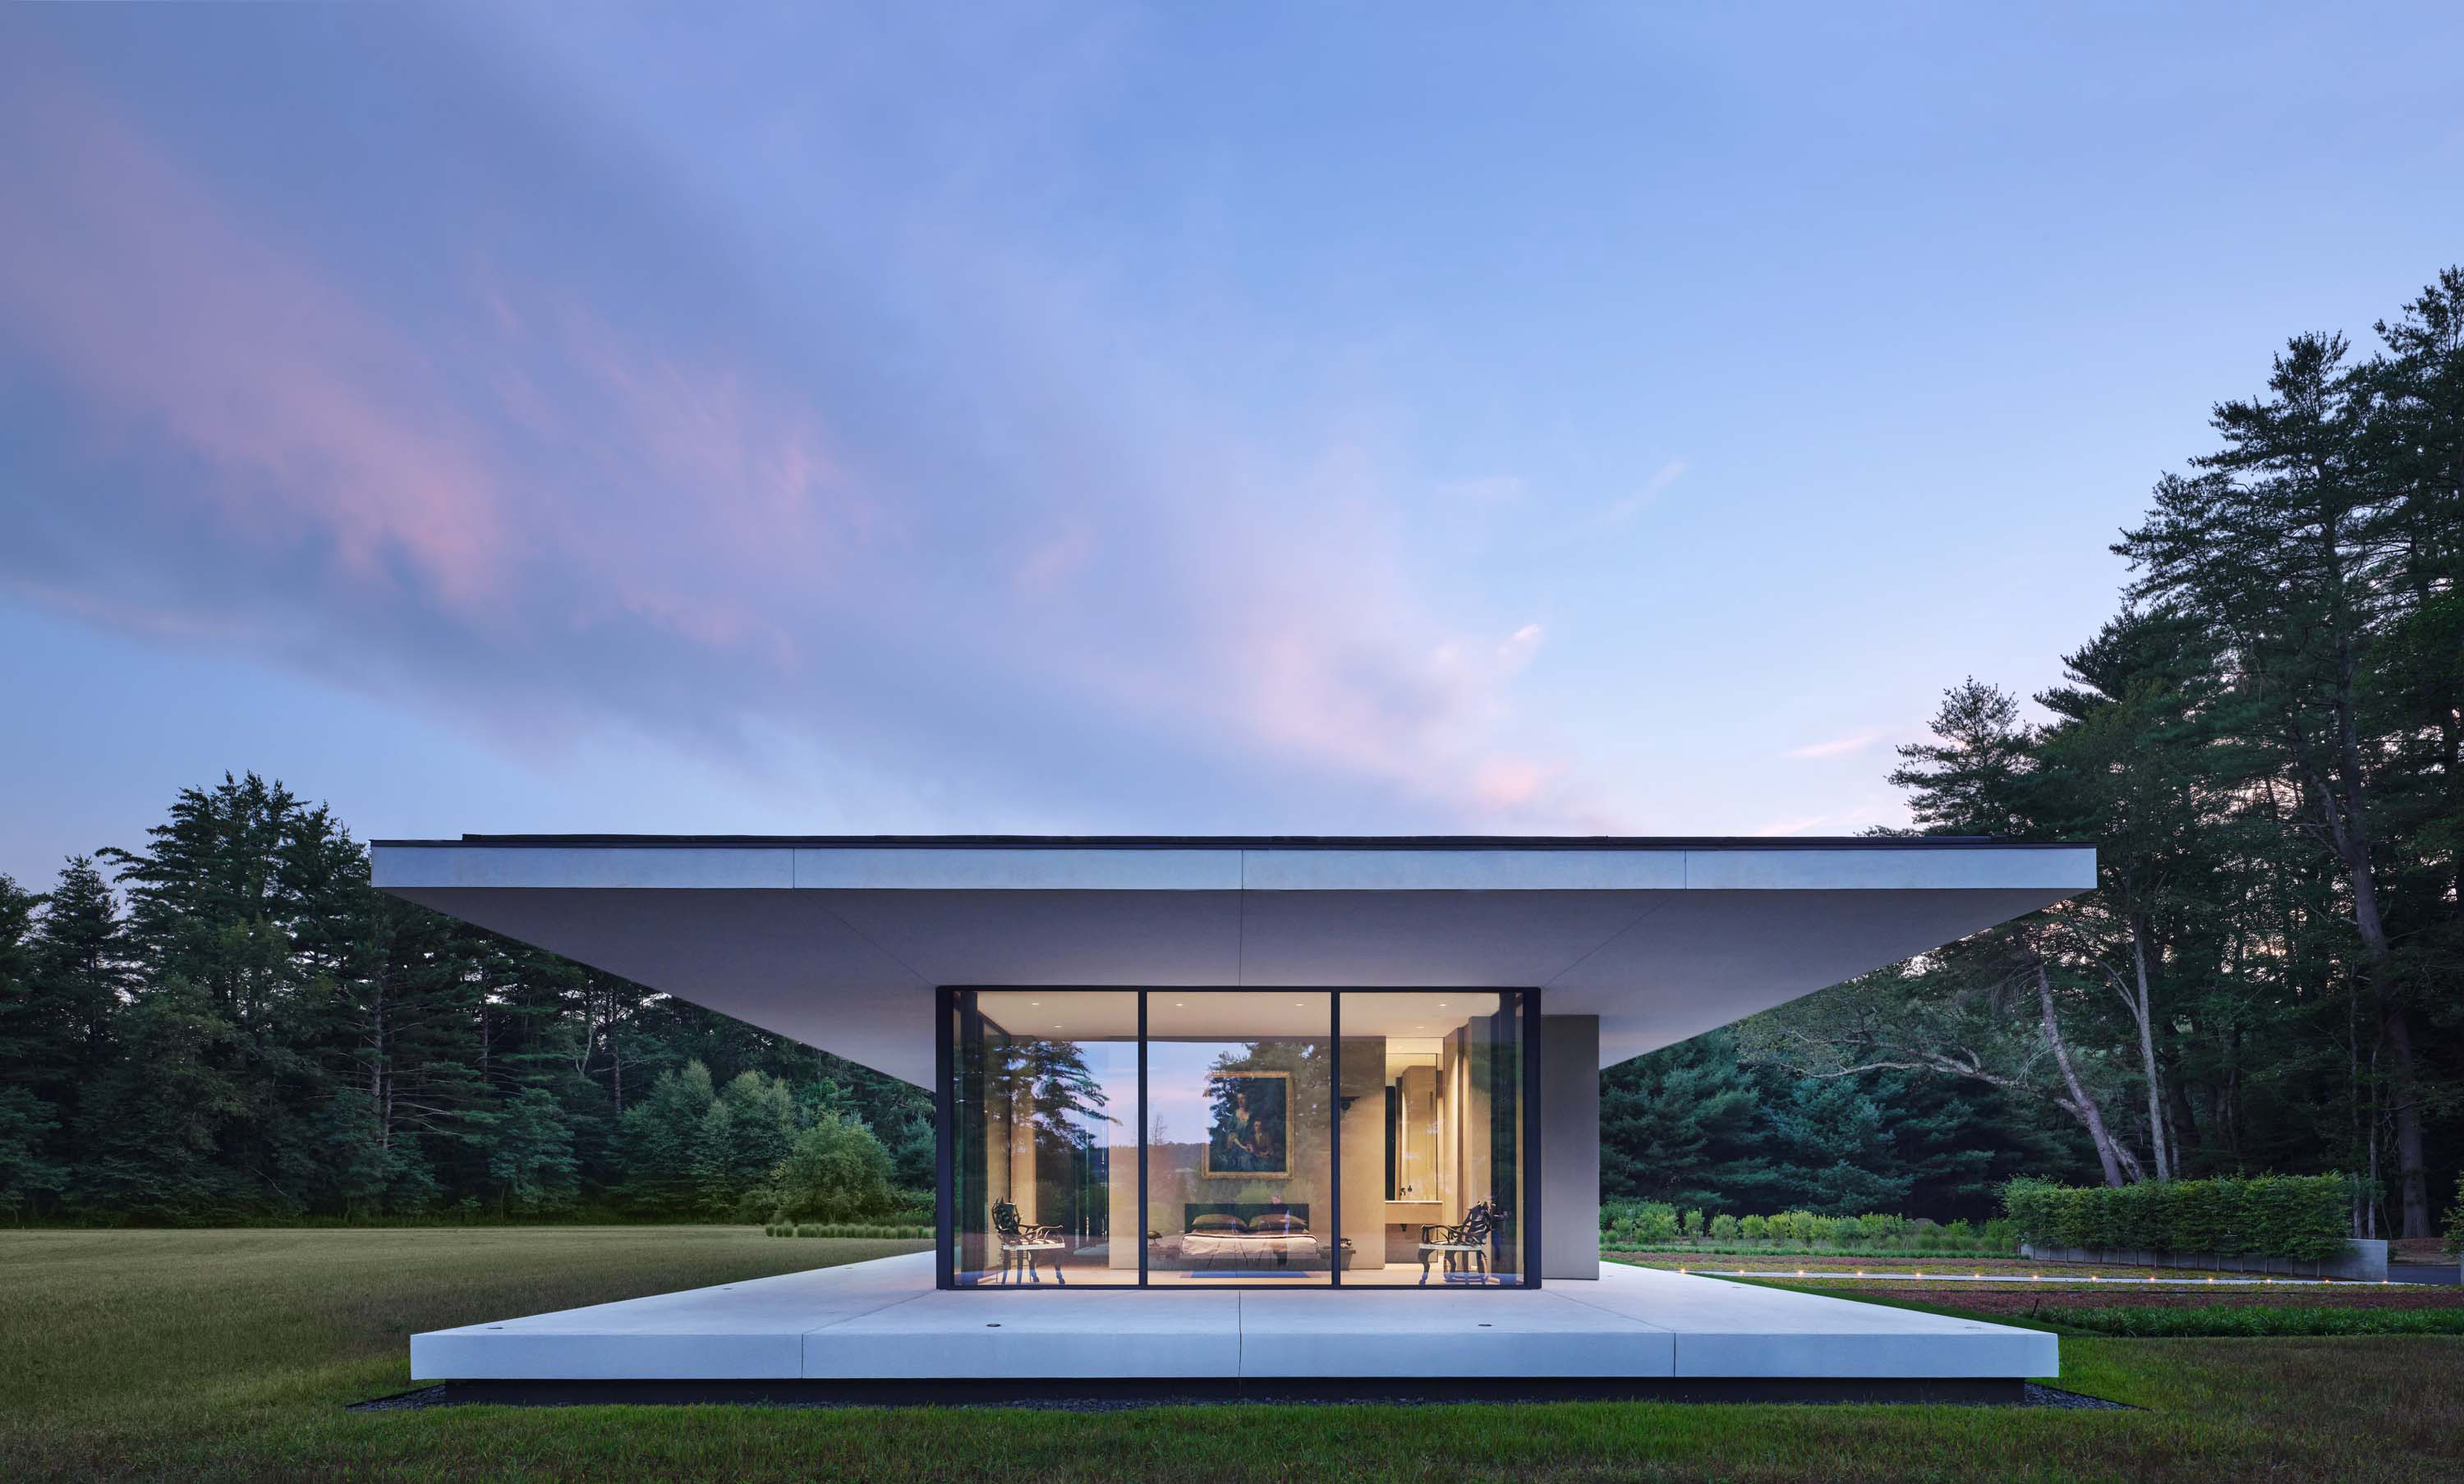 Exterior photo of the Casa Annunziata Residence by Specht Novak Architects. Shot at dusk by Dror Baldinger, featuring a side view of the symmetrical single-story pavilion with a thin floating roof that cantilevers 15’ from the perimeter walls, in perfect harmony with its natural surroundings.